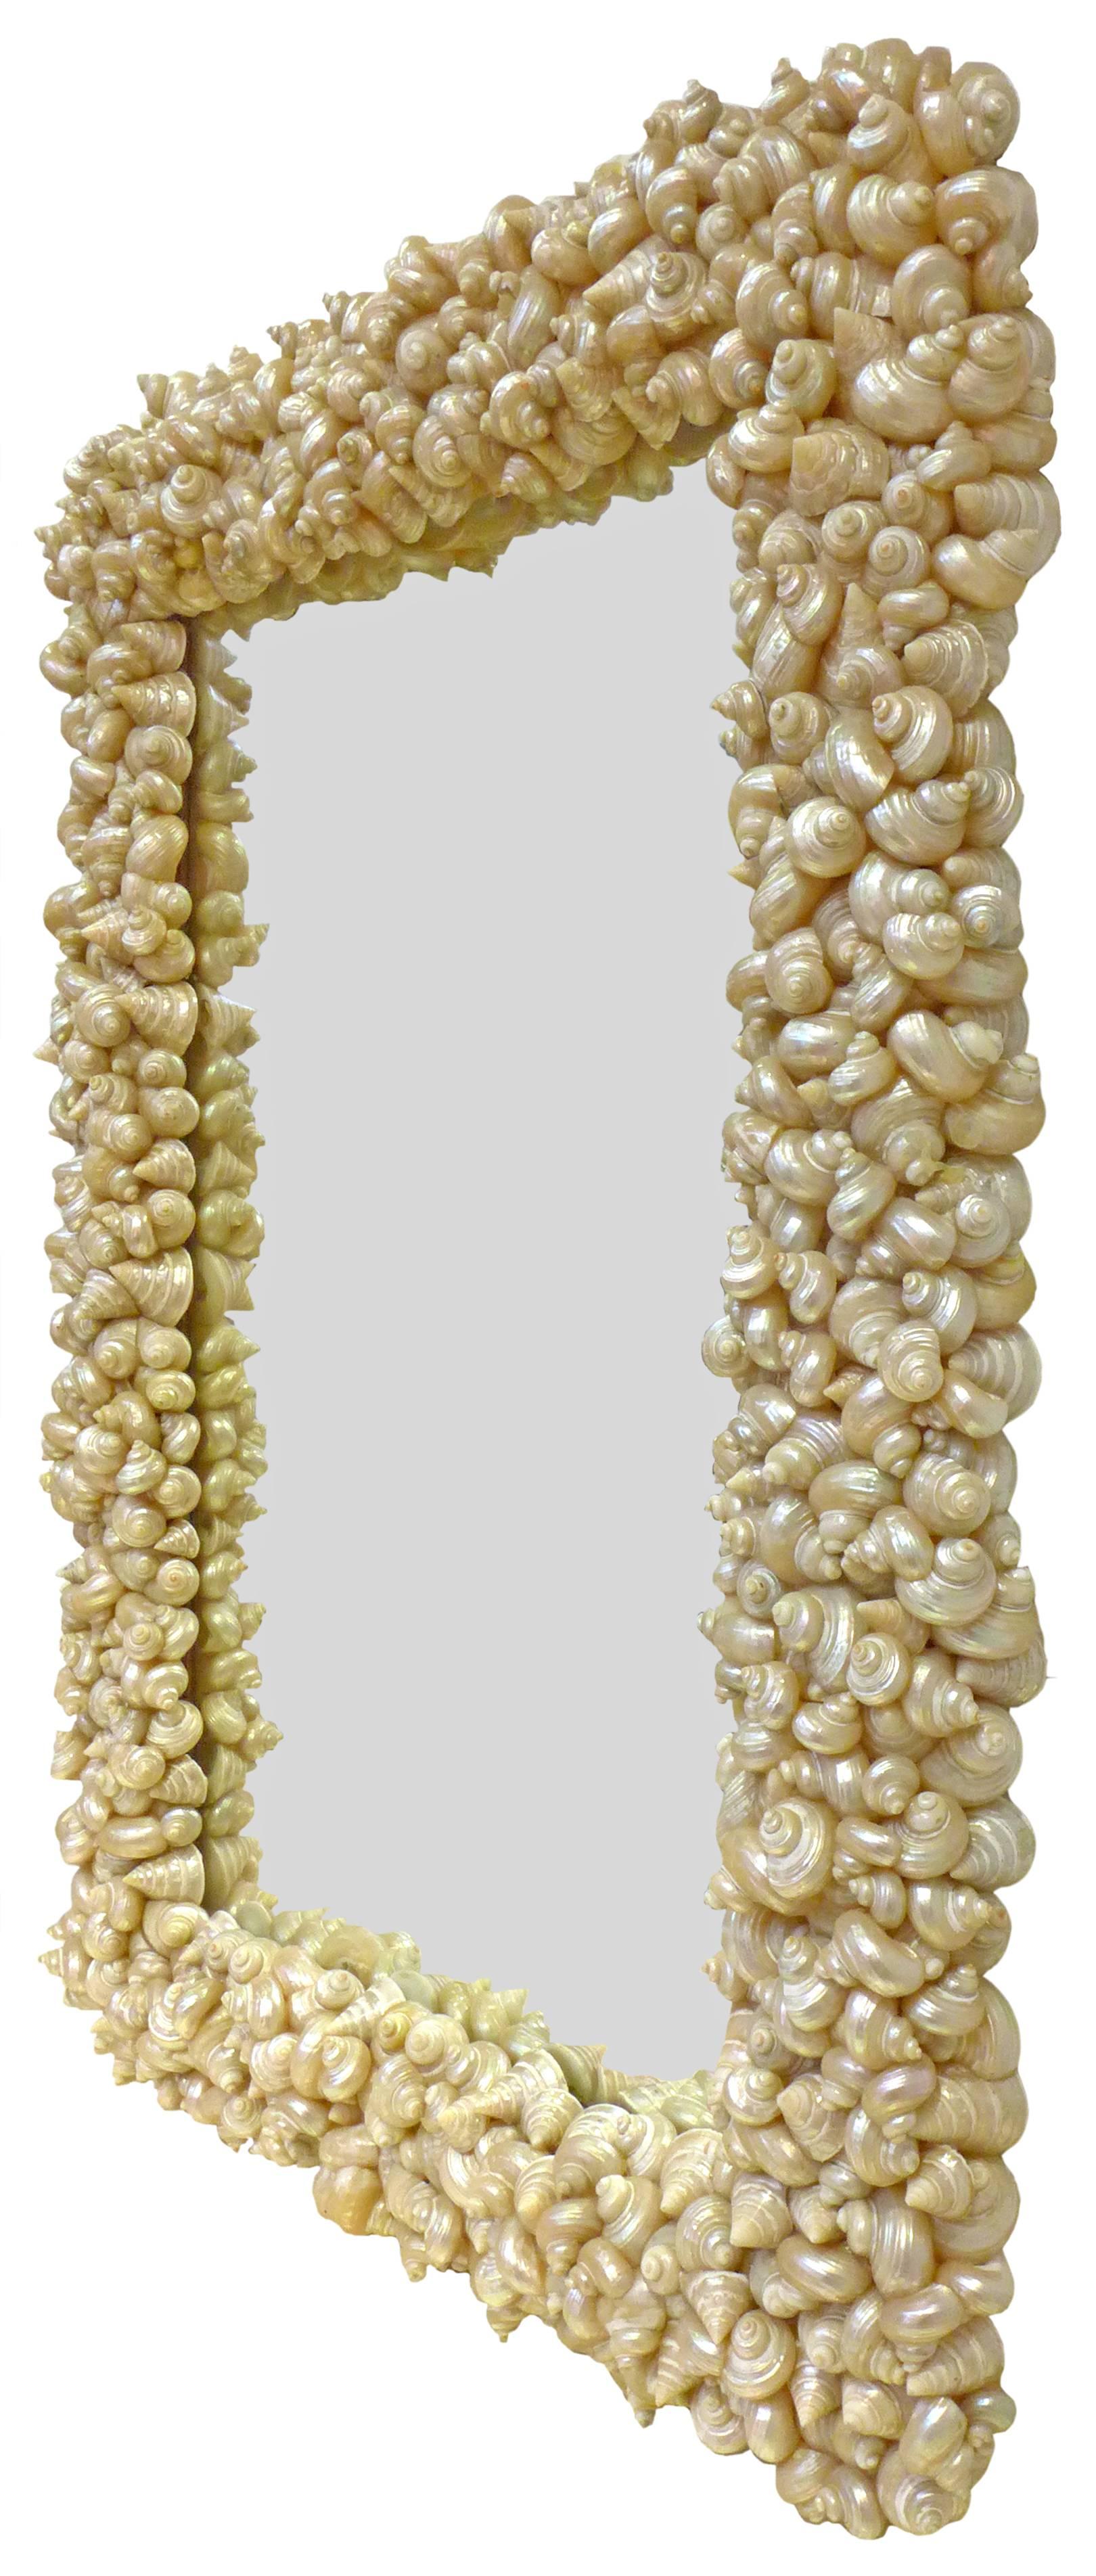 A fantastic half-length mirror wearing a frame fully encrusted with seashells. An otherwise straightforward, utilitarian item taken to an unexpected place with its meticulous and thoroughly executed, opalescent, exoskeletal perimeter. A wonderfully